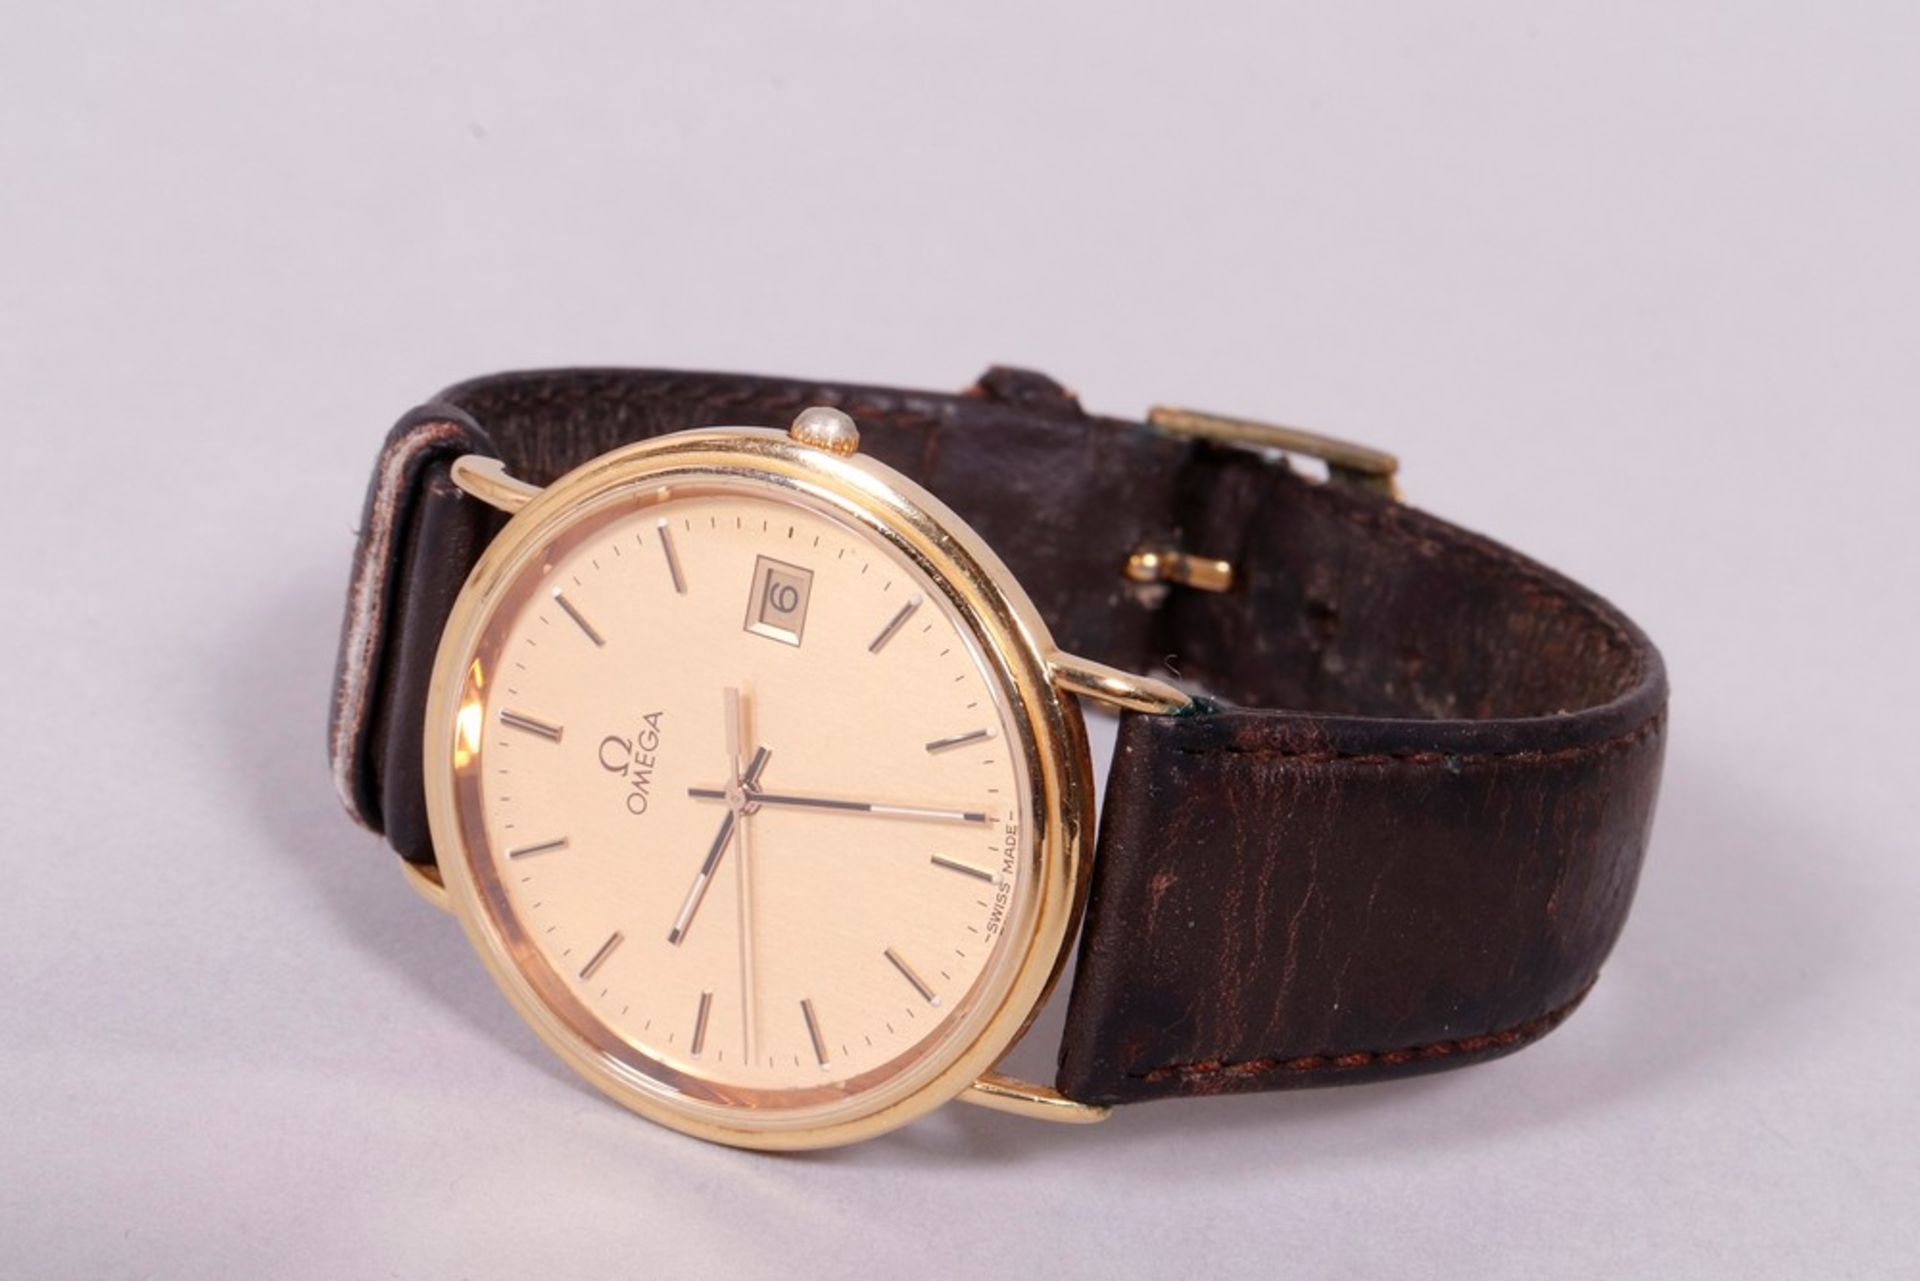 Gent's wristwatch, 750 gold, Omega Classic Date - Image 2 of 3